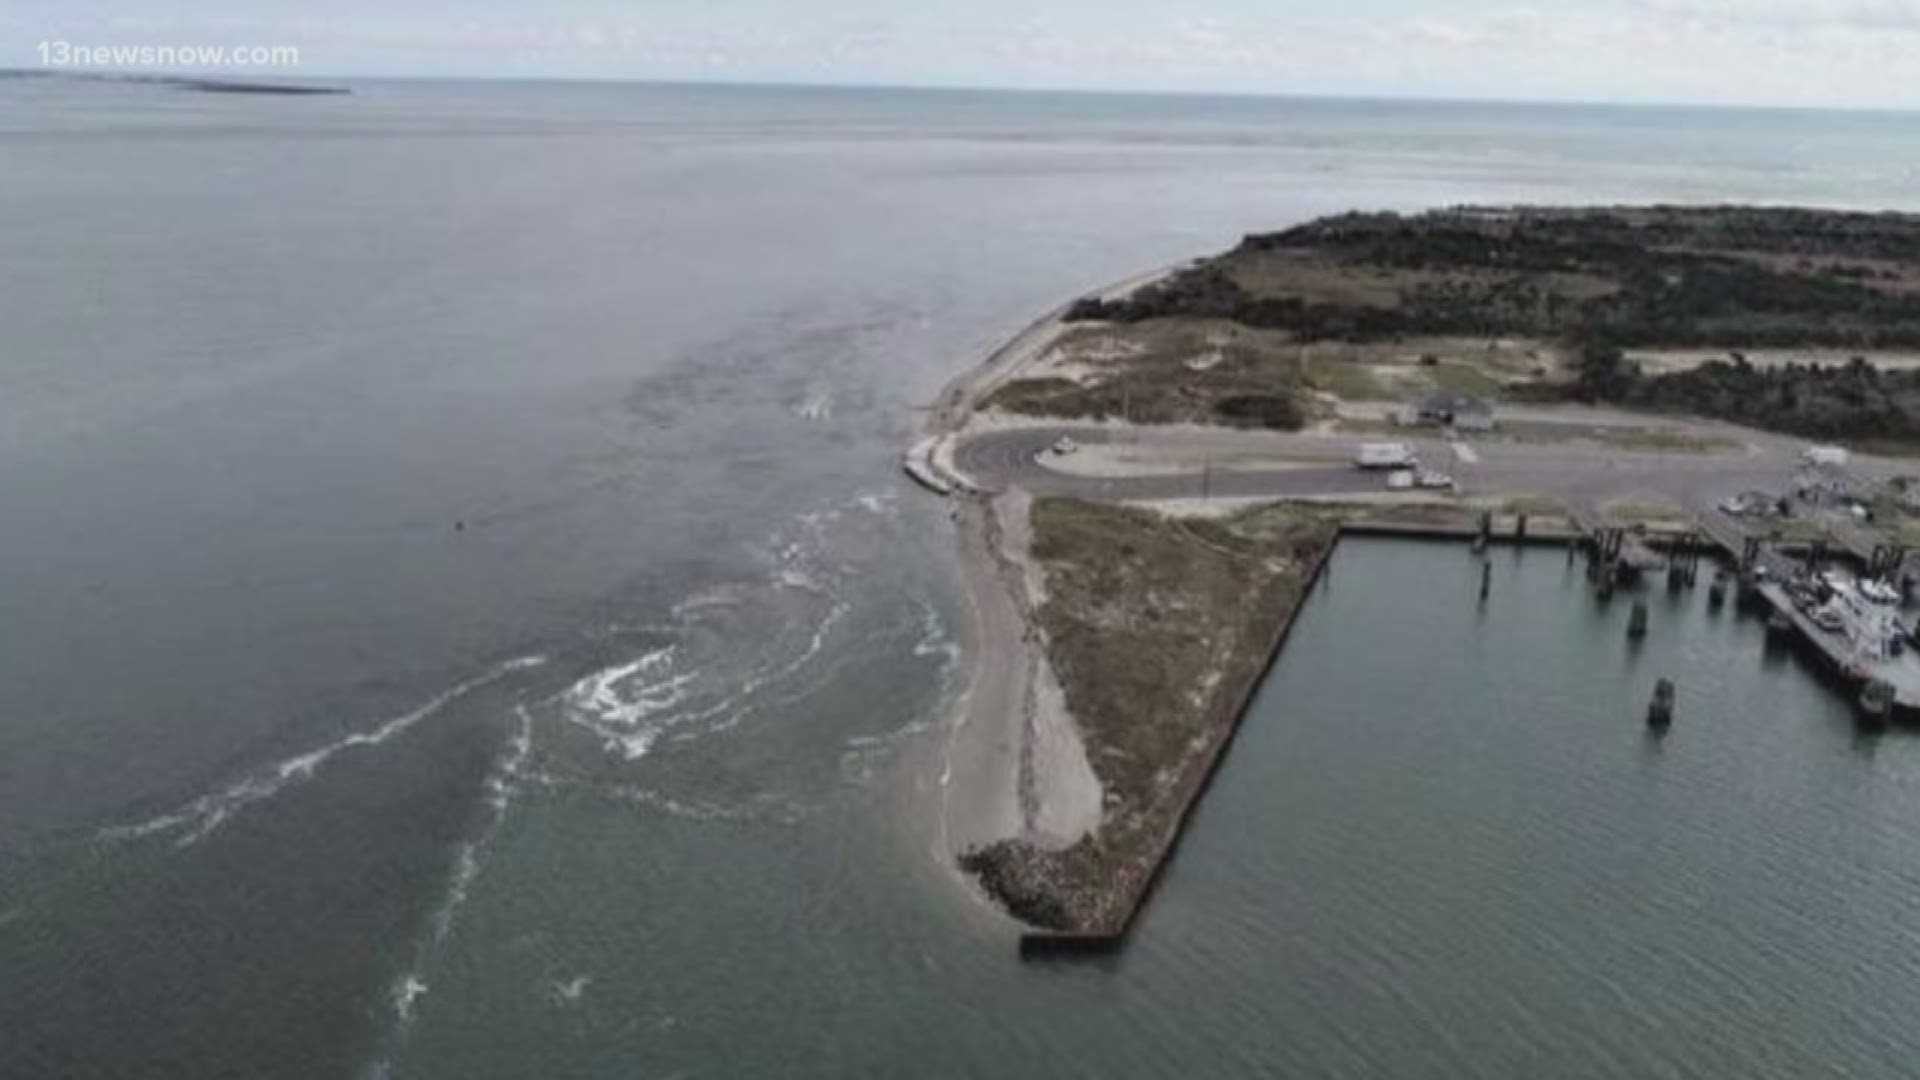 According to an environmental study, the shoreline at the northern end is starting to erode. The public can weigh in on a proposal to build a steel wall to protect it.